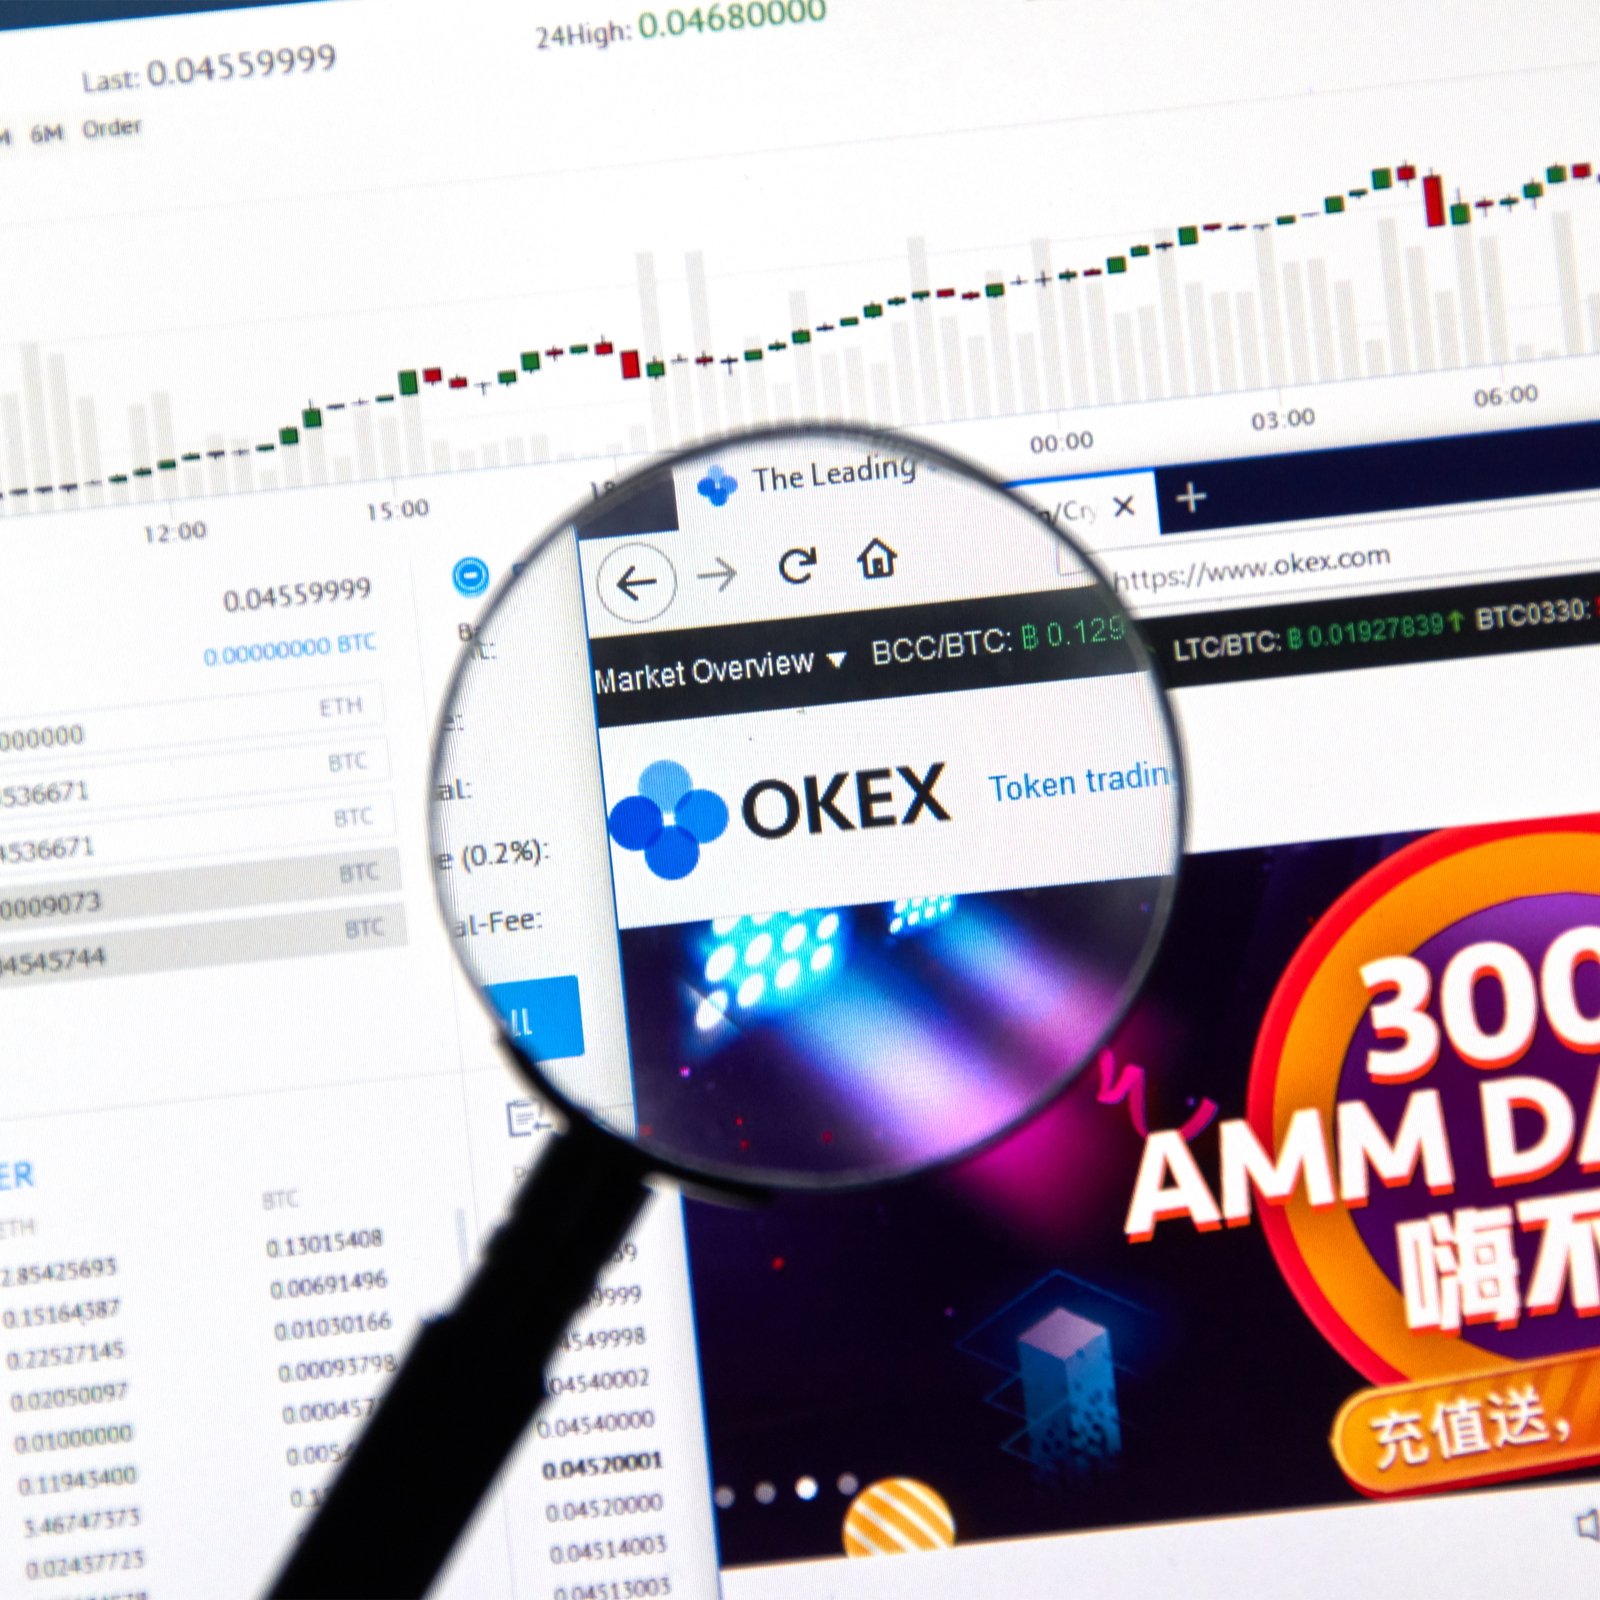 Okex Fights Market Manipulation Rumors Following Painful Futures Contracts Rollback